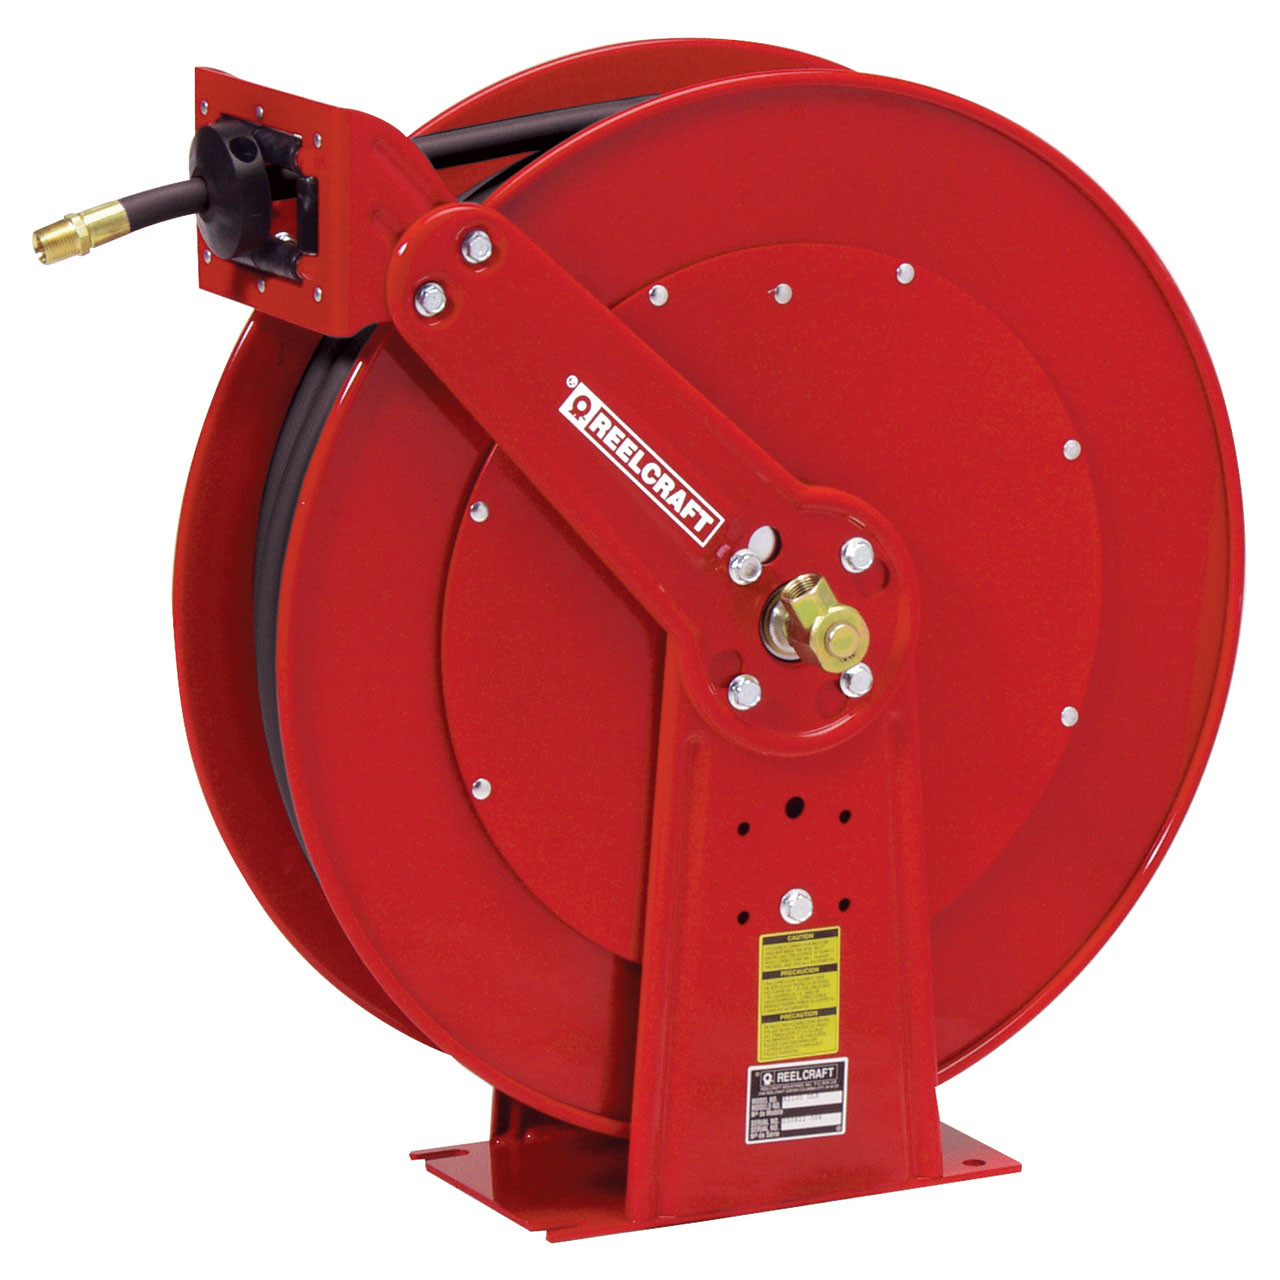 Reelcraft 80000 Series Pressure Wash Spring Retractable Hose Reel with 3/8  in. x 100 ft. Hose - John M. Ellsworth Co. Inc.